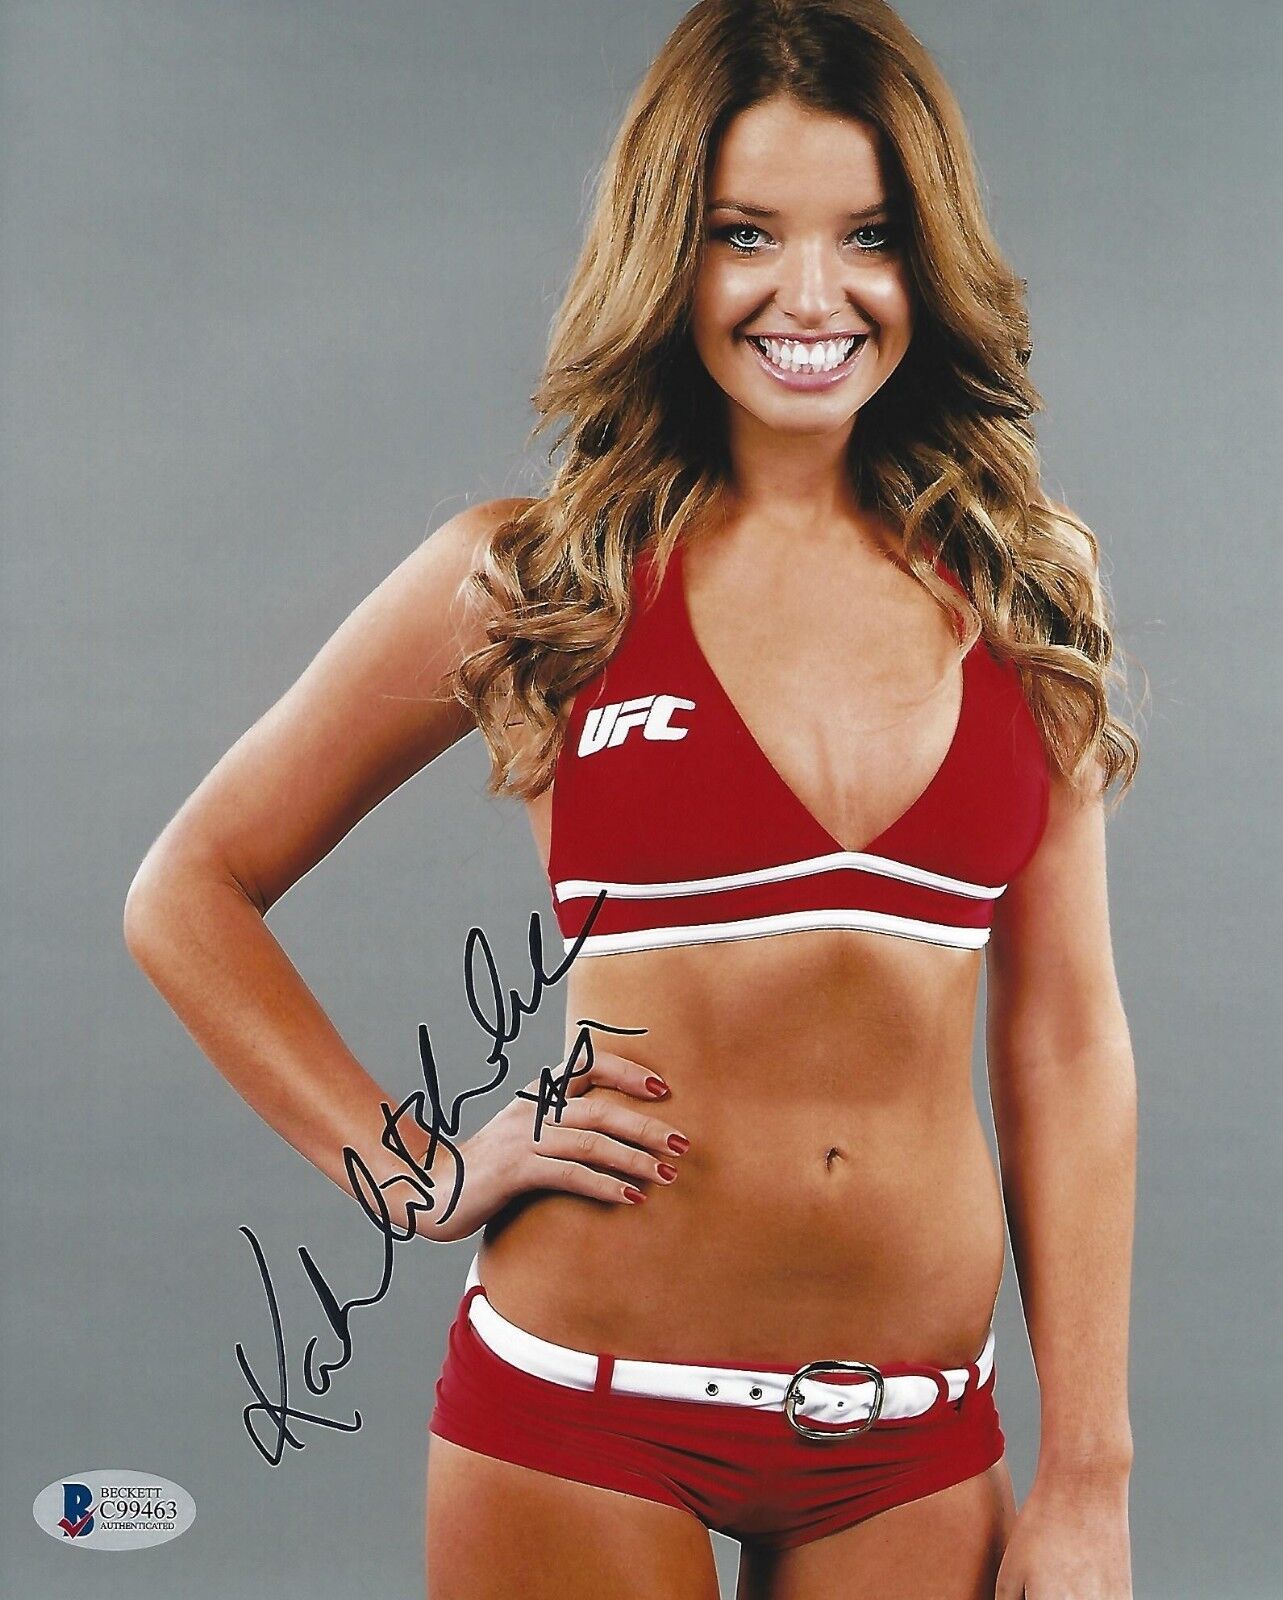 Kahili Blundell Signed 8x10 Photo Poster painting BAS Beckett COA UFC Octagon Girl MMA Autograph